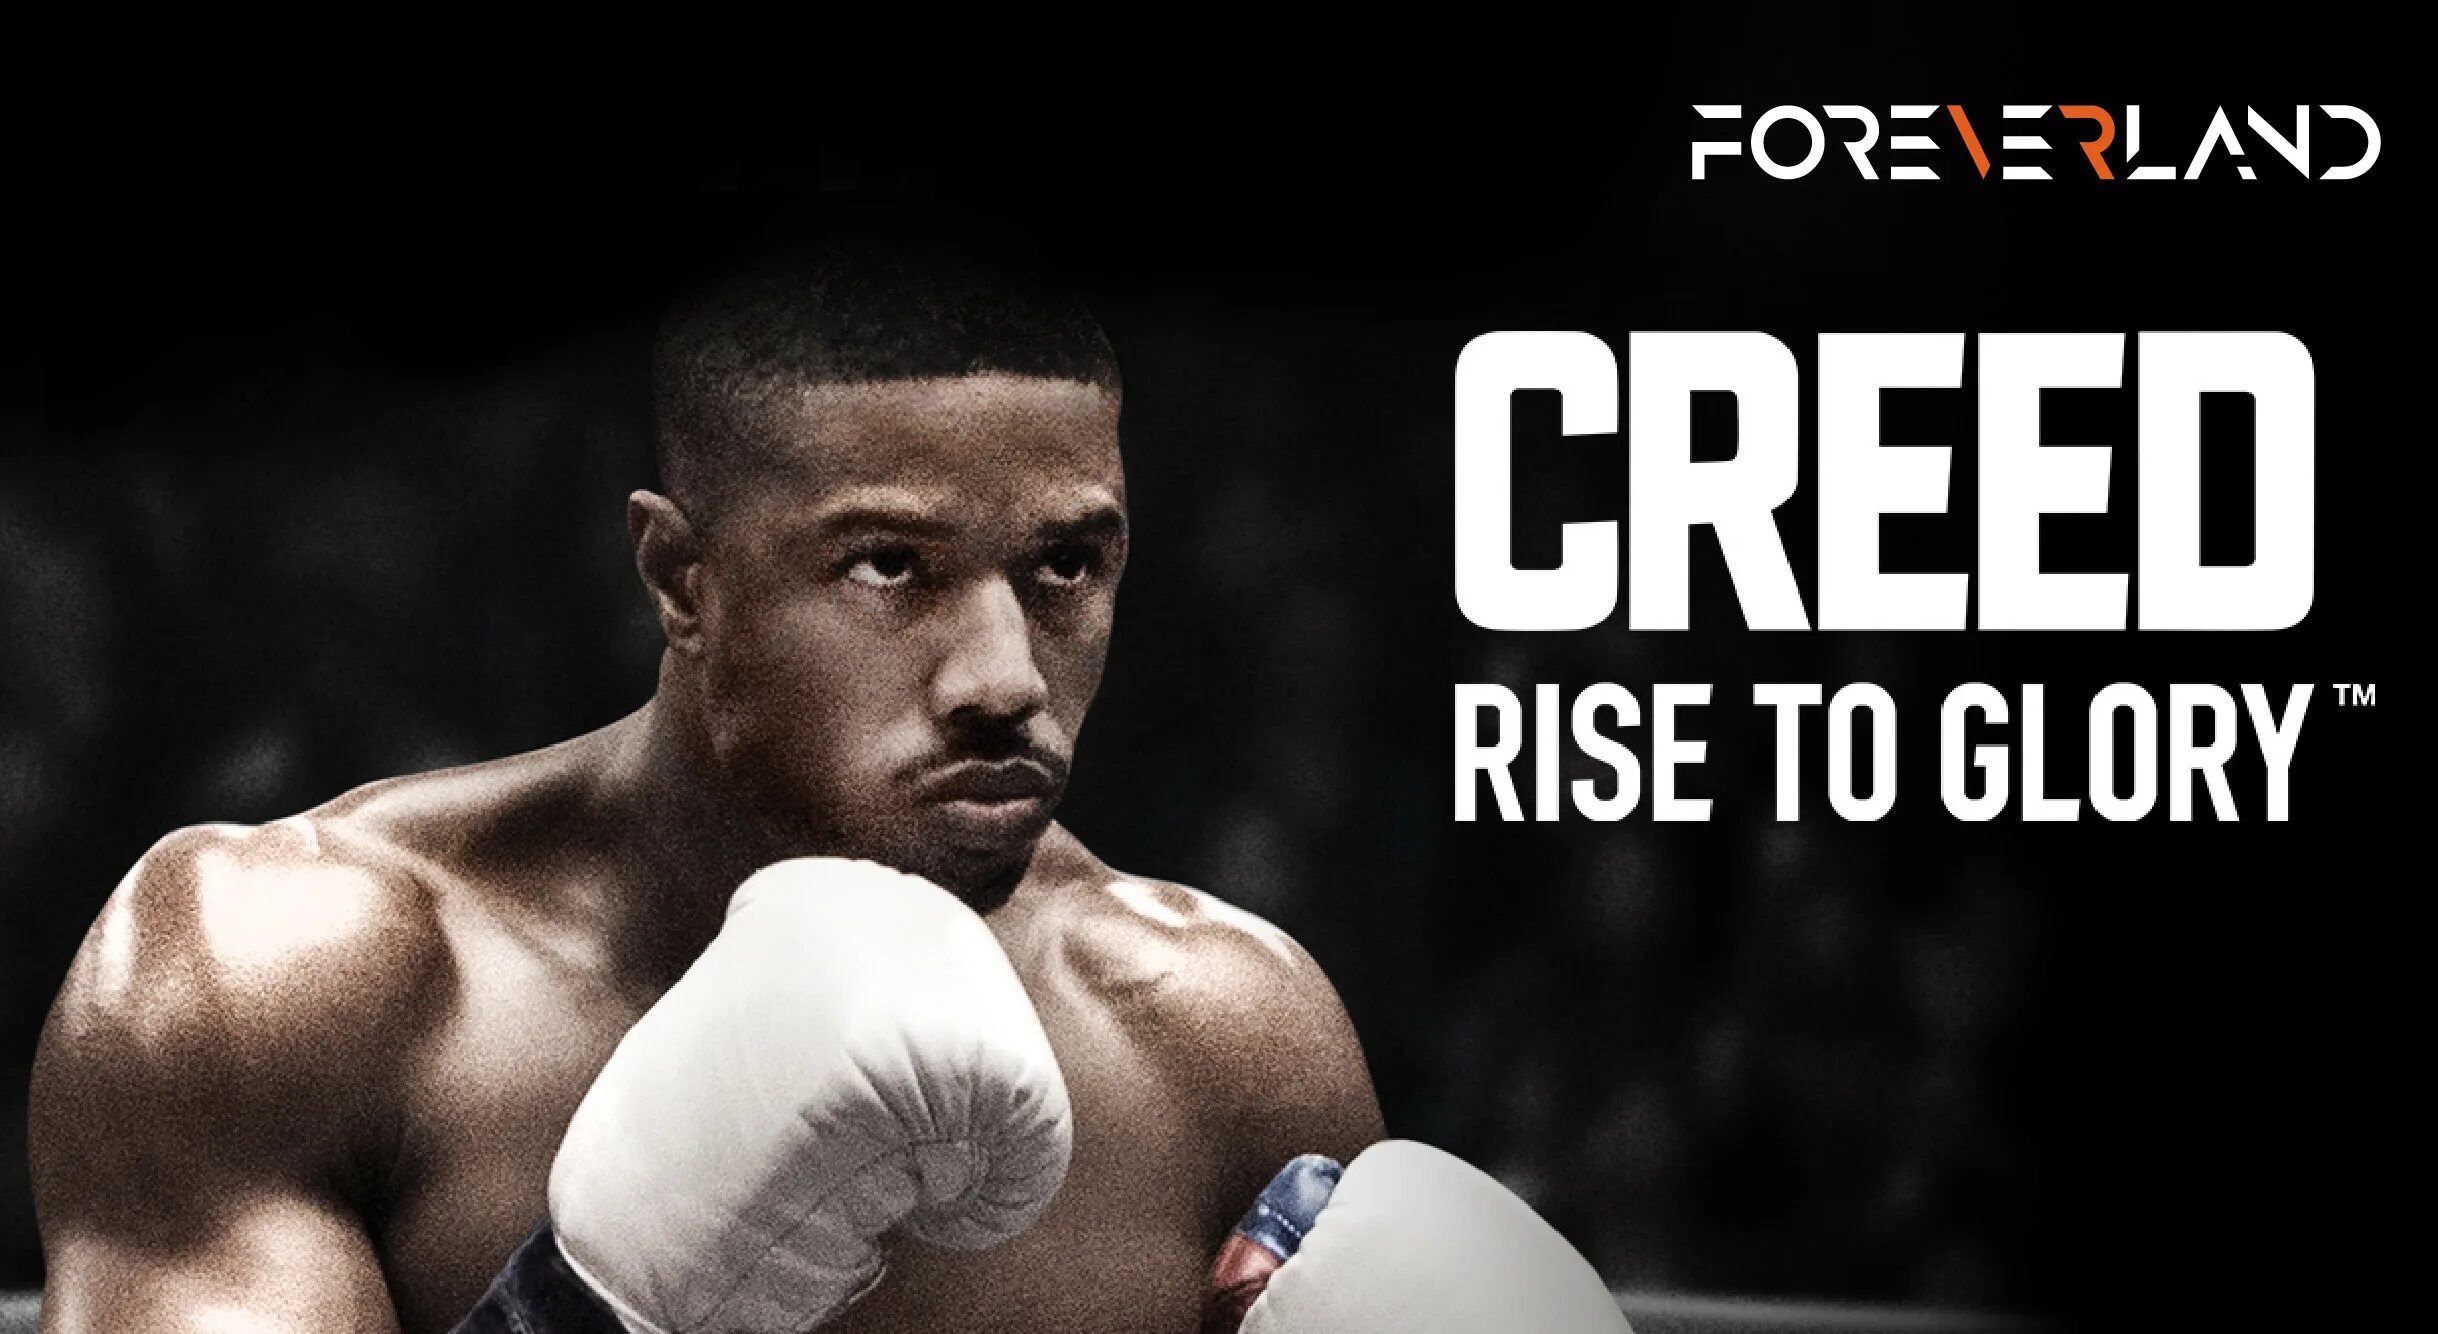 Creed Rise to Glory. Creed VR. Creed VR игра. Меню Creed: Rise to Glory. Rise to glory vr